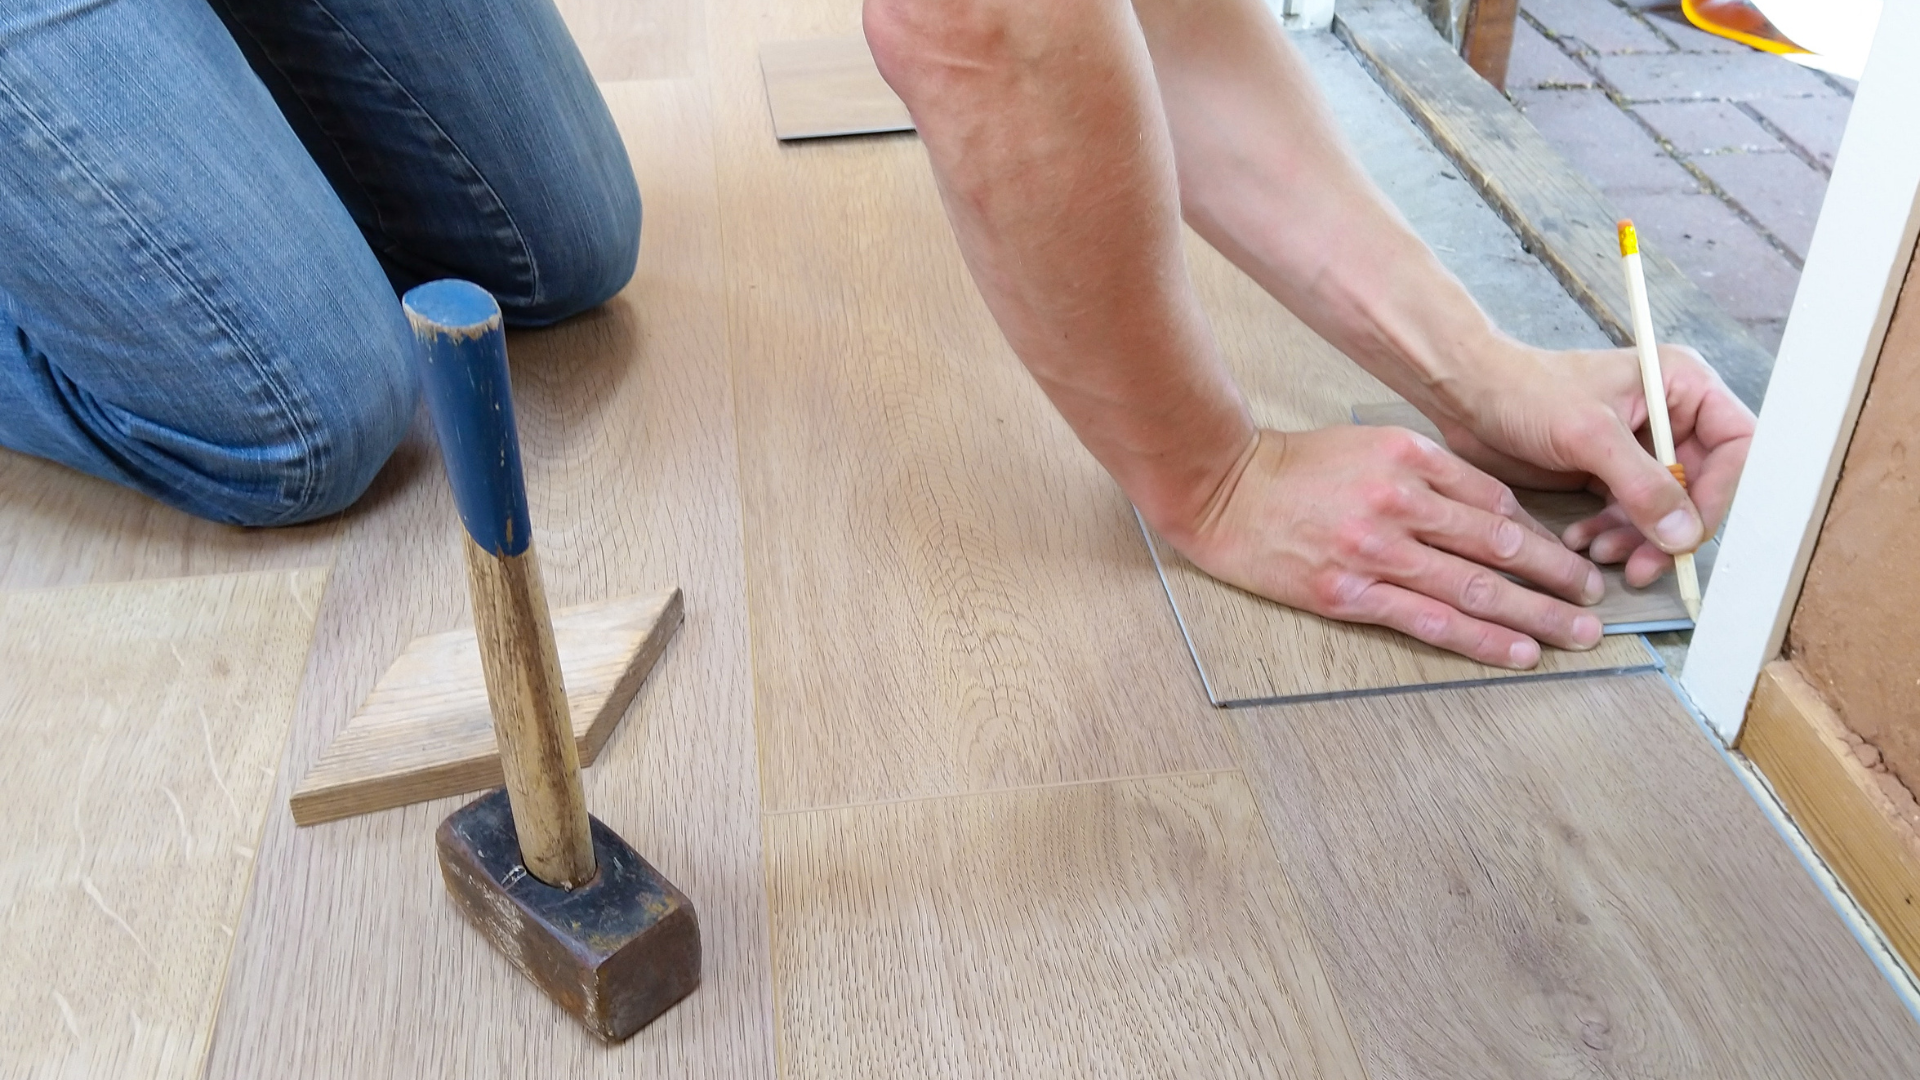 A flooring contractor measures wood-look LVP flooring to be cut and installed